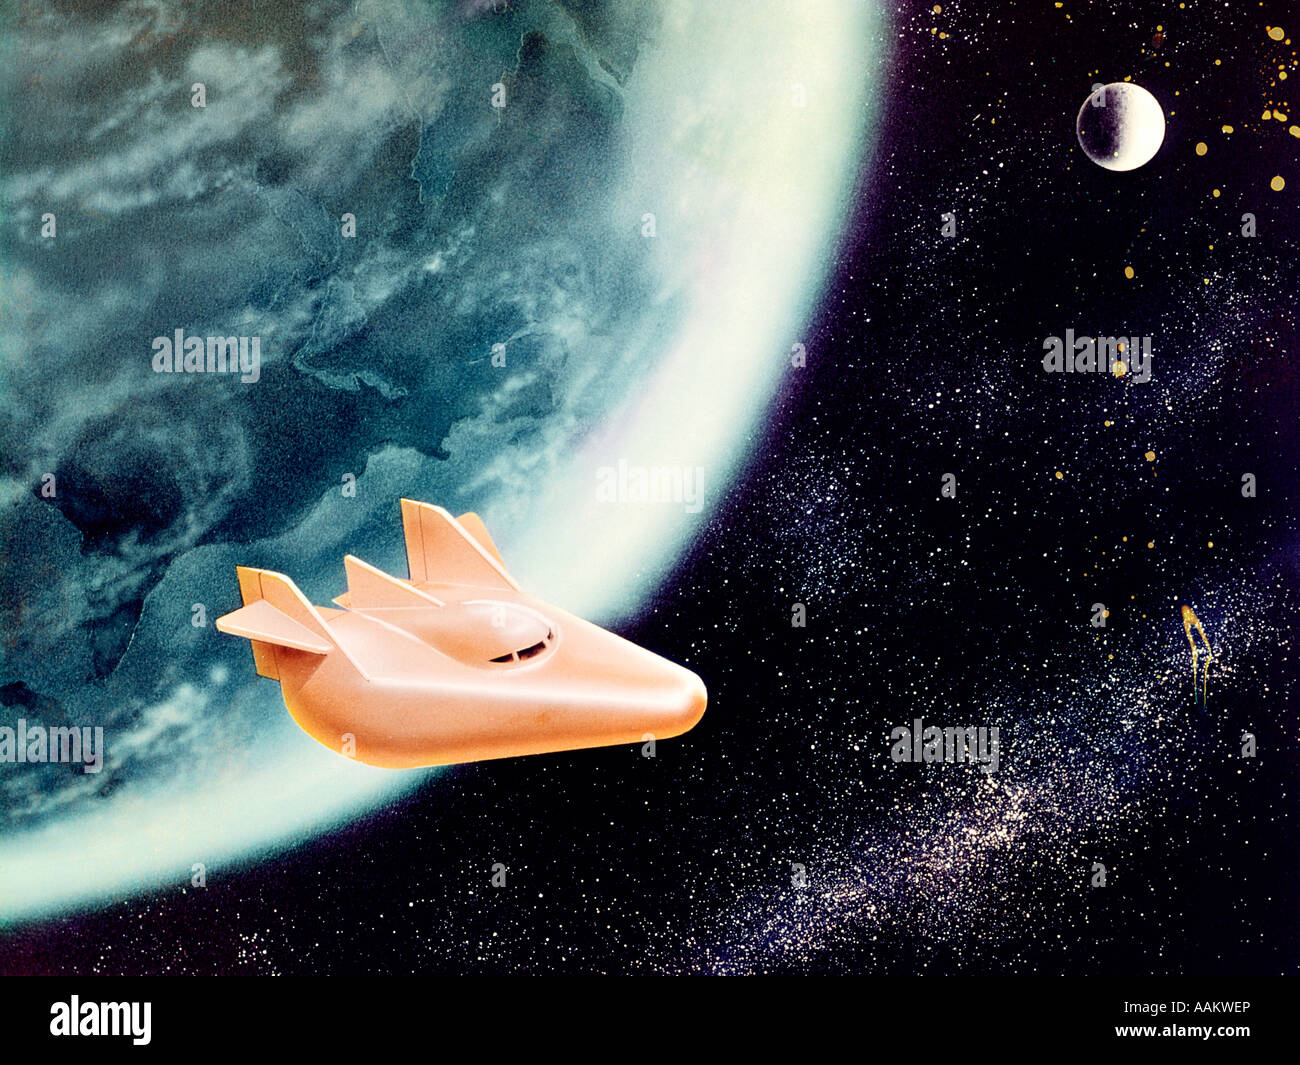 1960s ILLUSTRATION OF M-2 WINGLESS SPACE SHIP VEHICLE LEAVING EARTH ORBIT MOON SCIENCE FICTION SCI-FI Stock Photo